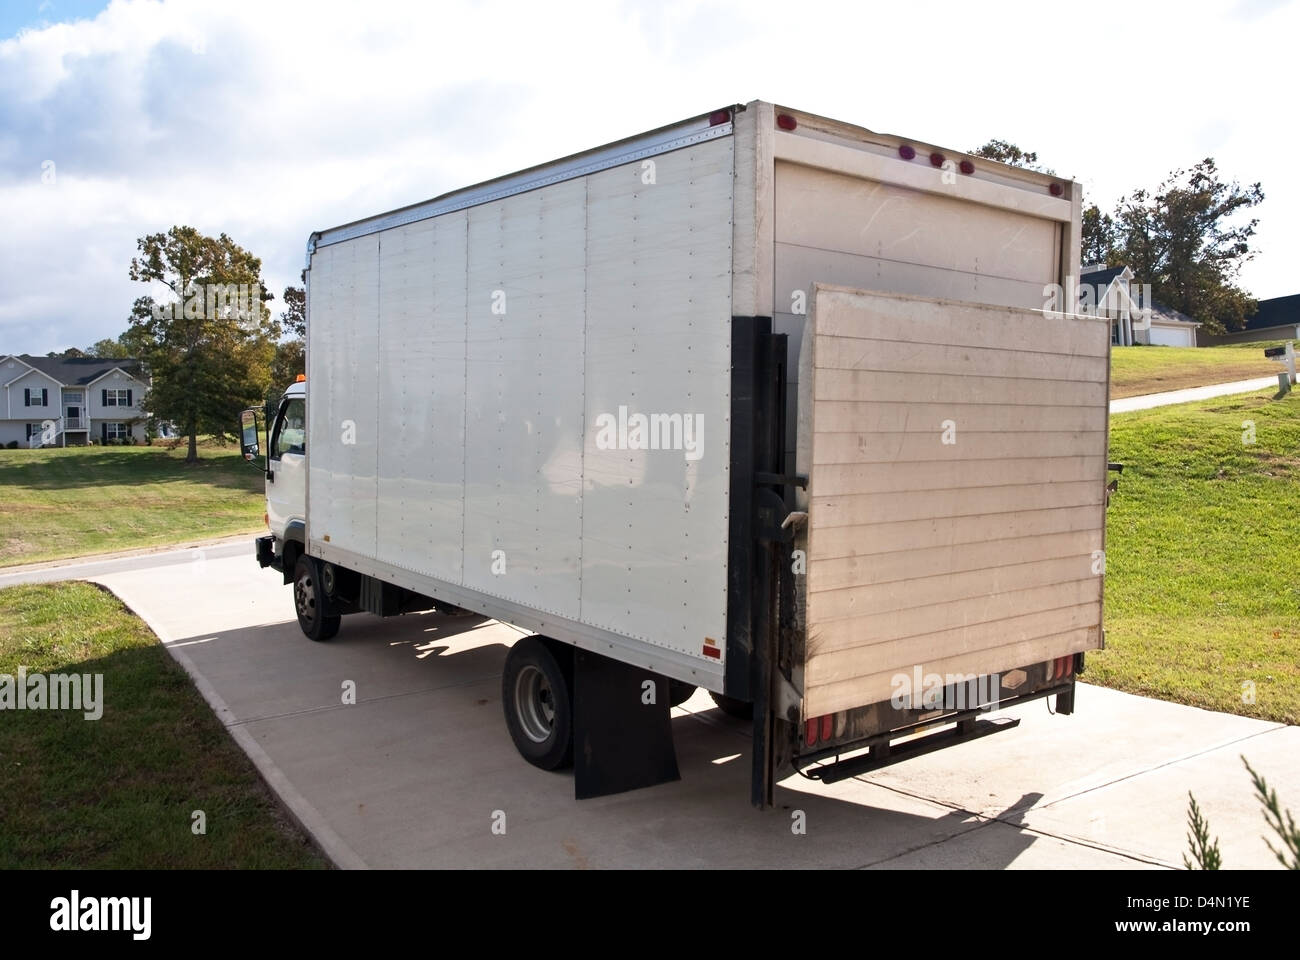 A large appliance delivery truck in the driveway of a home. Stock Photo